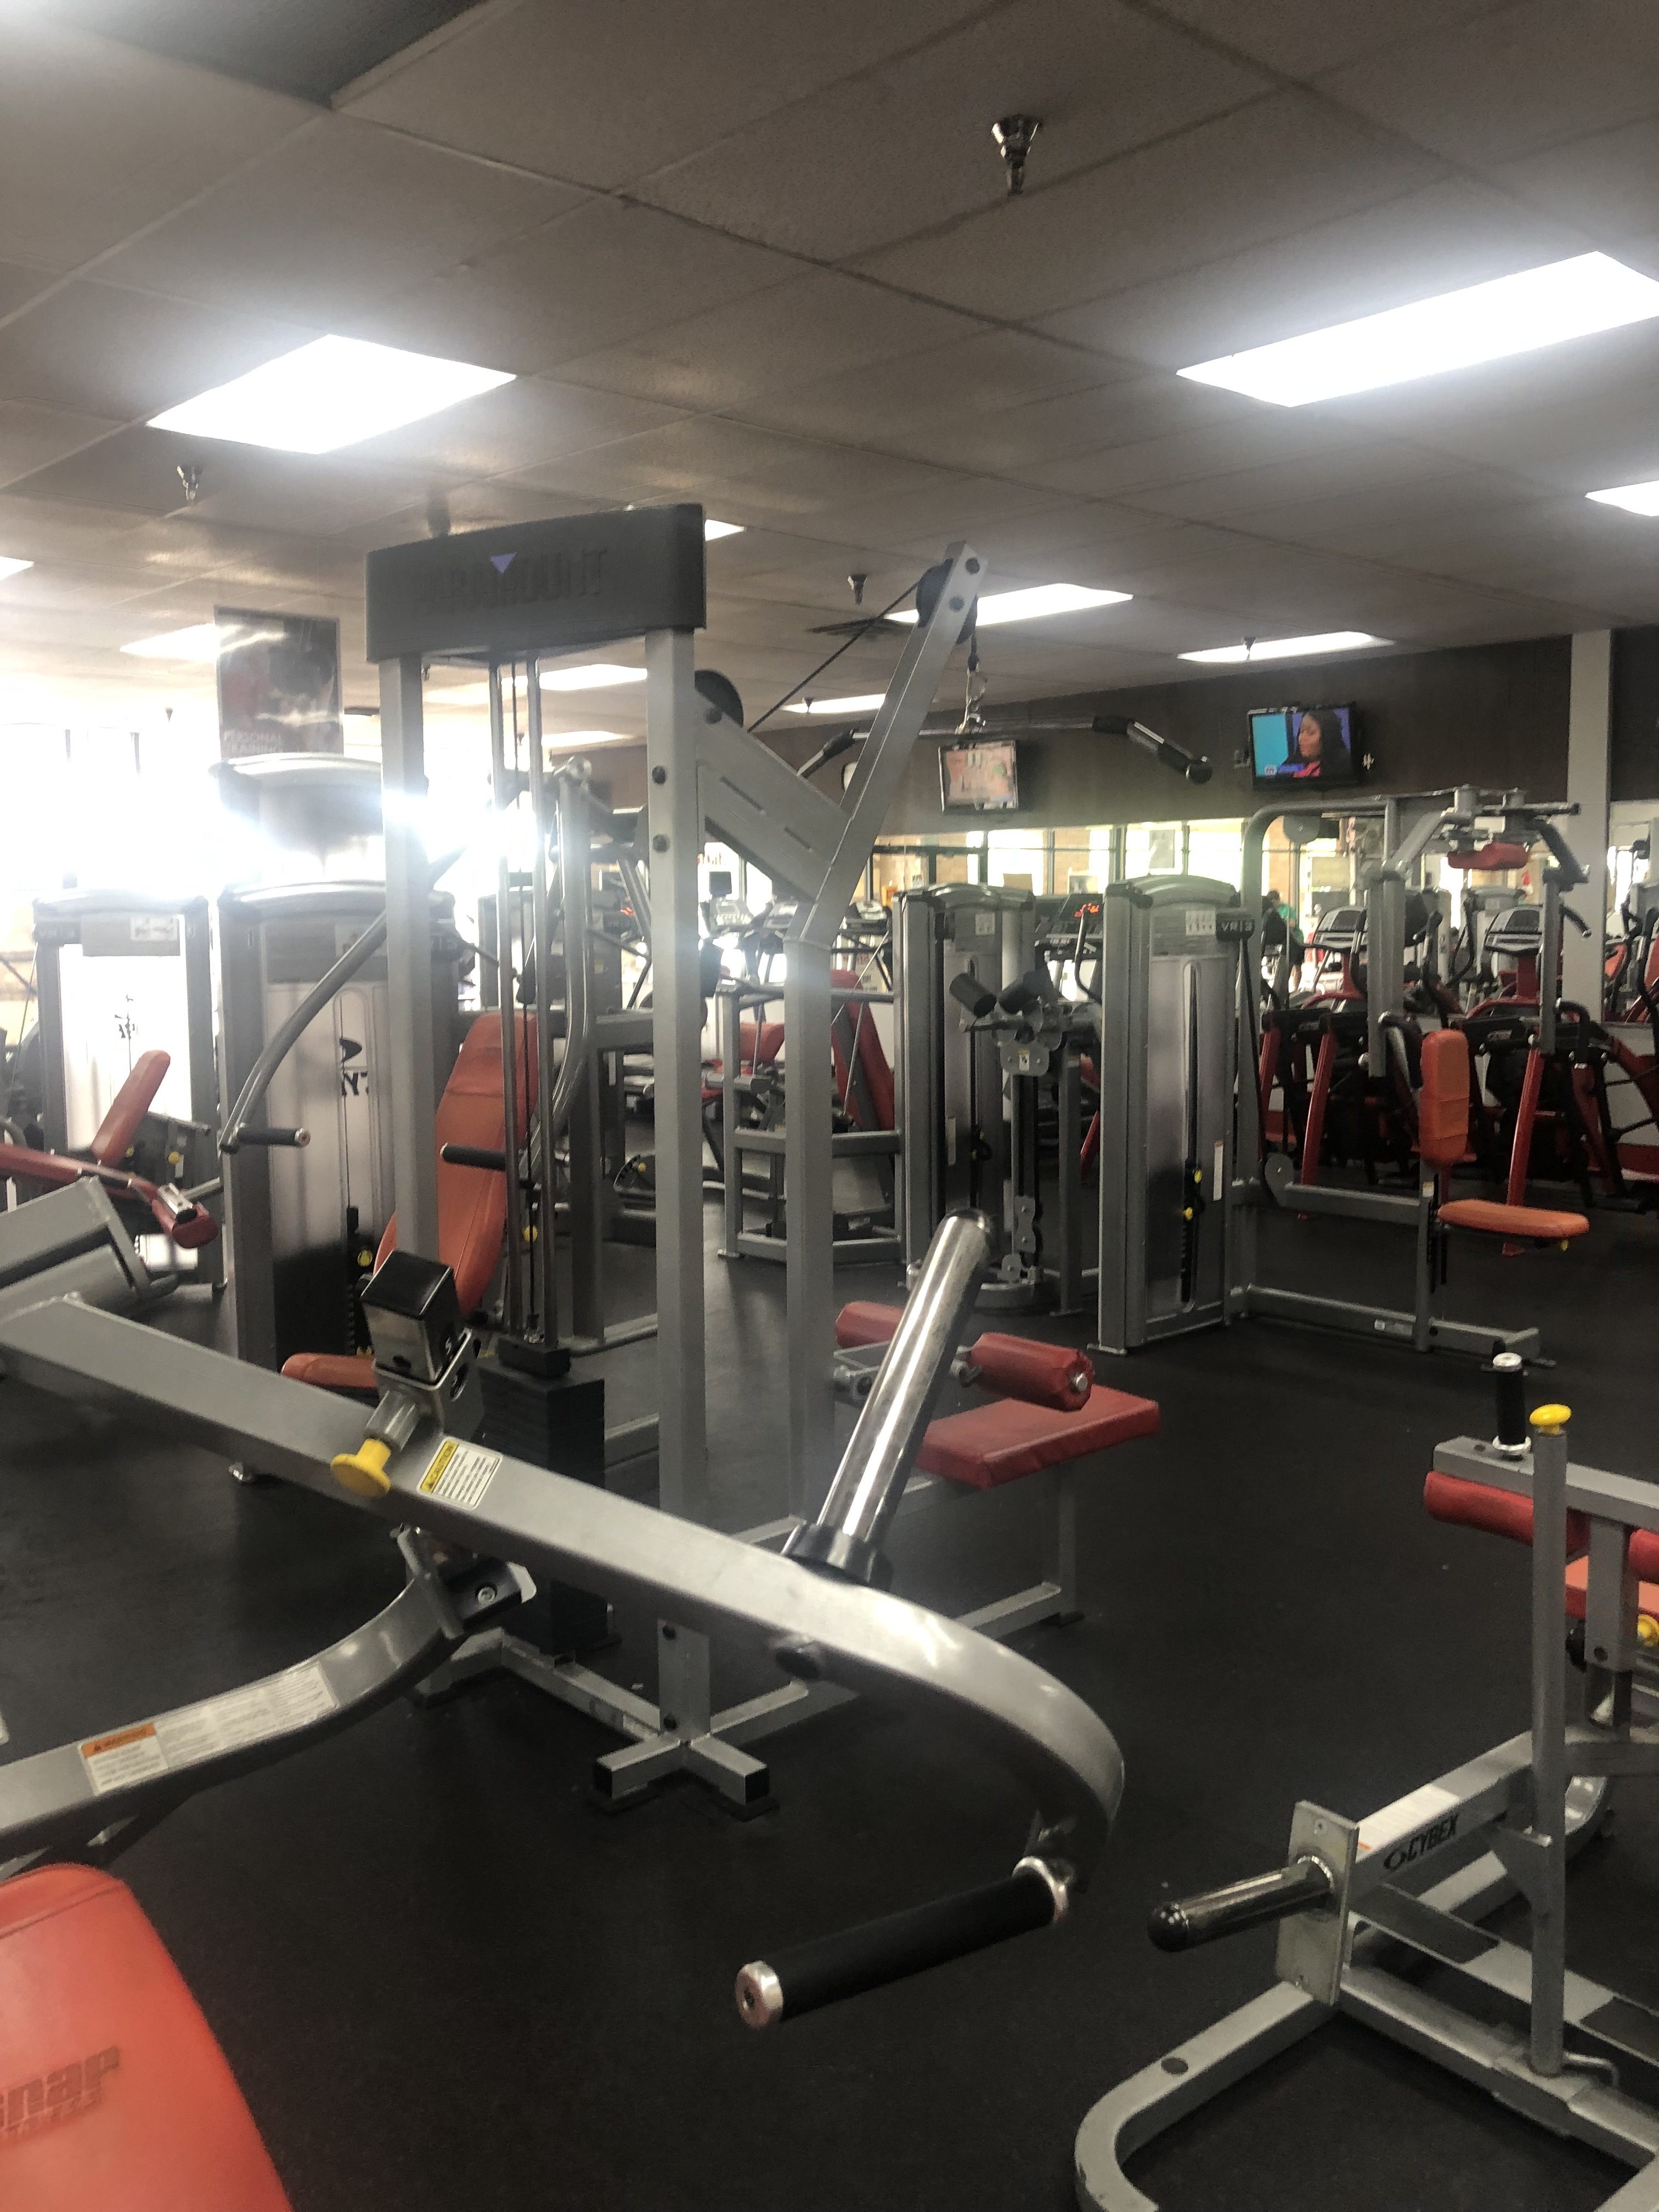 Absolute Auction – Fitness Center Going Out of Business Sale | 147 Lincoln Trail Blvd. | Saturday, July 20th @ 2:00 pm EDT